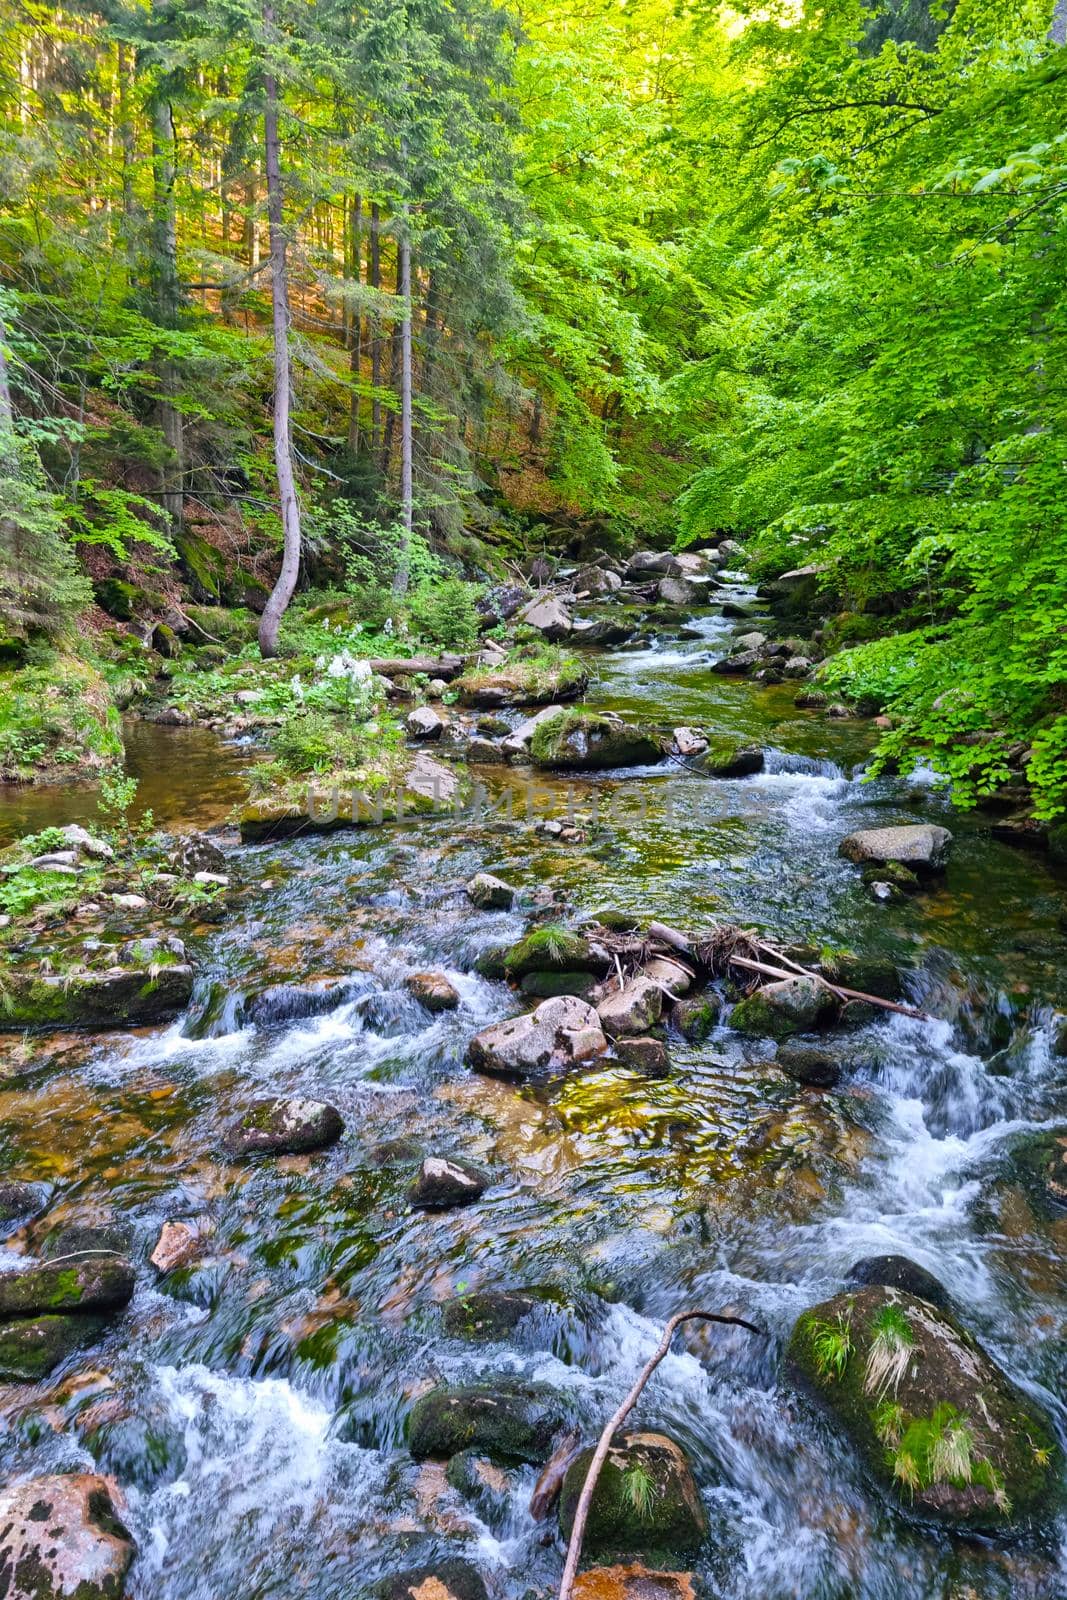 A small river flows over rocks in a green forest